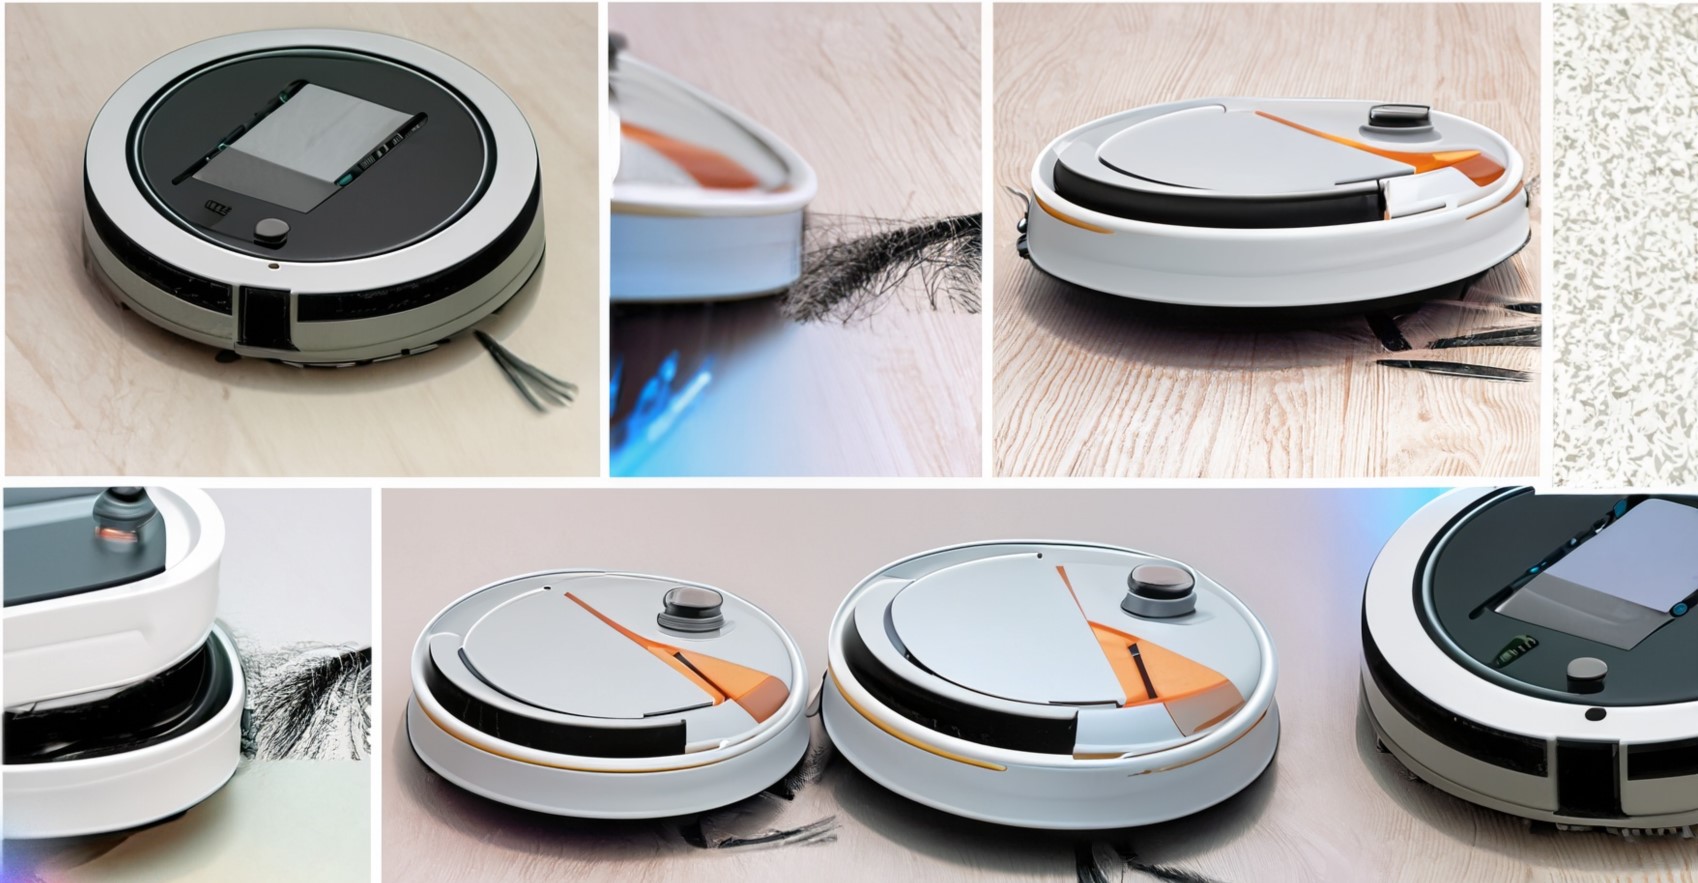 The Future of Cleaning: 5 Advanced Robot Vacuums That Will Change the Way You Clean Your Home